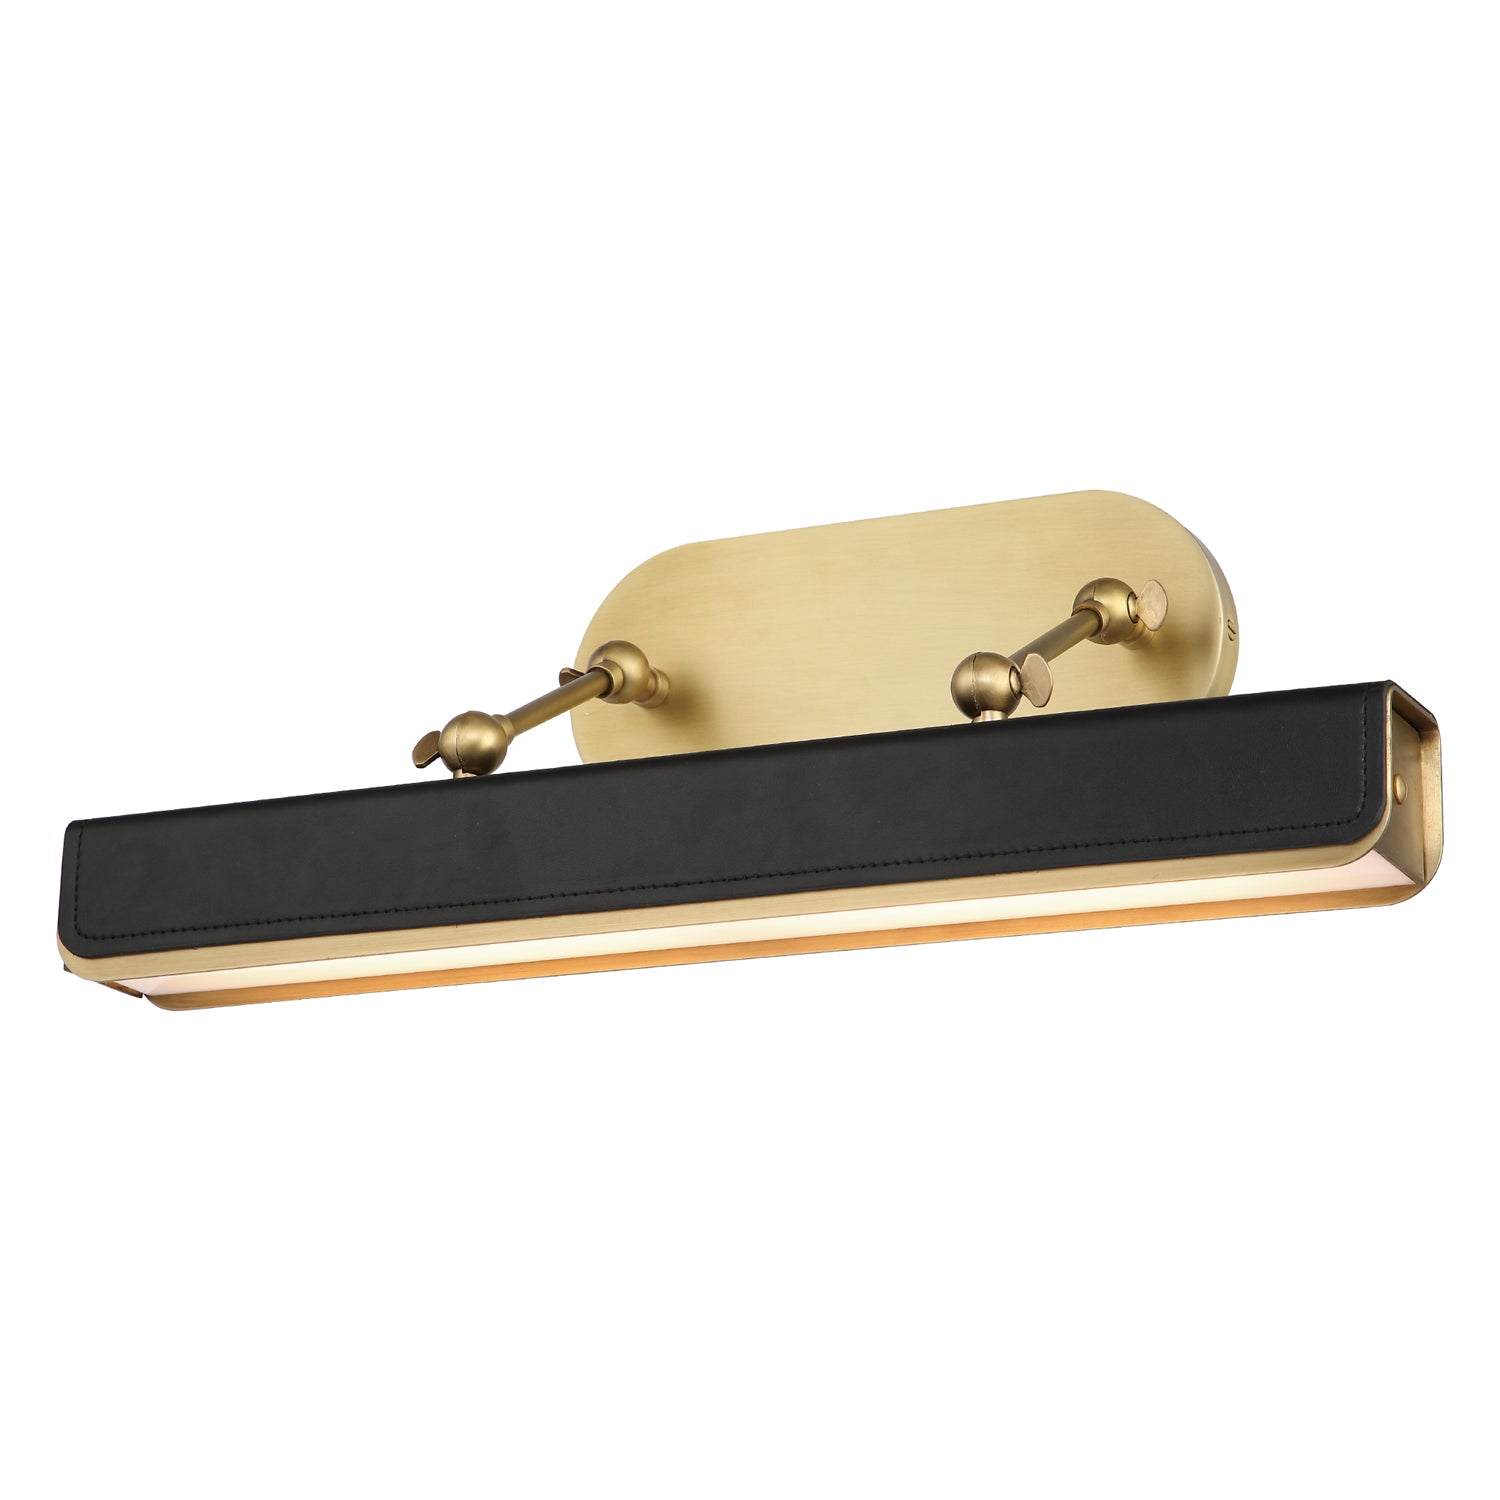 Alora Canada - LED Wall Sconce - Valise Picture - Vintage Brass- Union Lighting Luminaires Decor